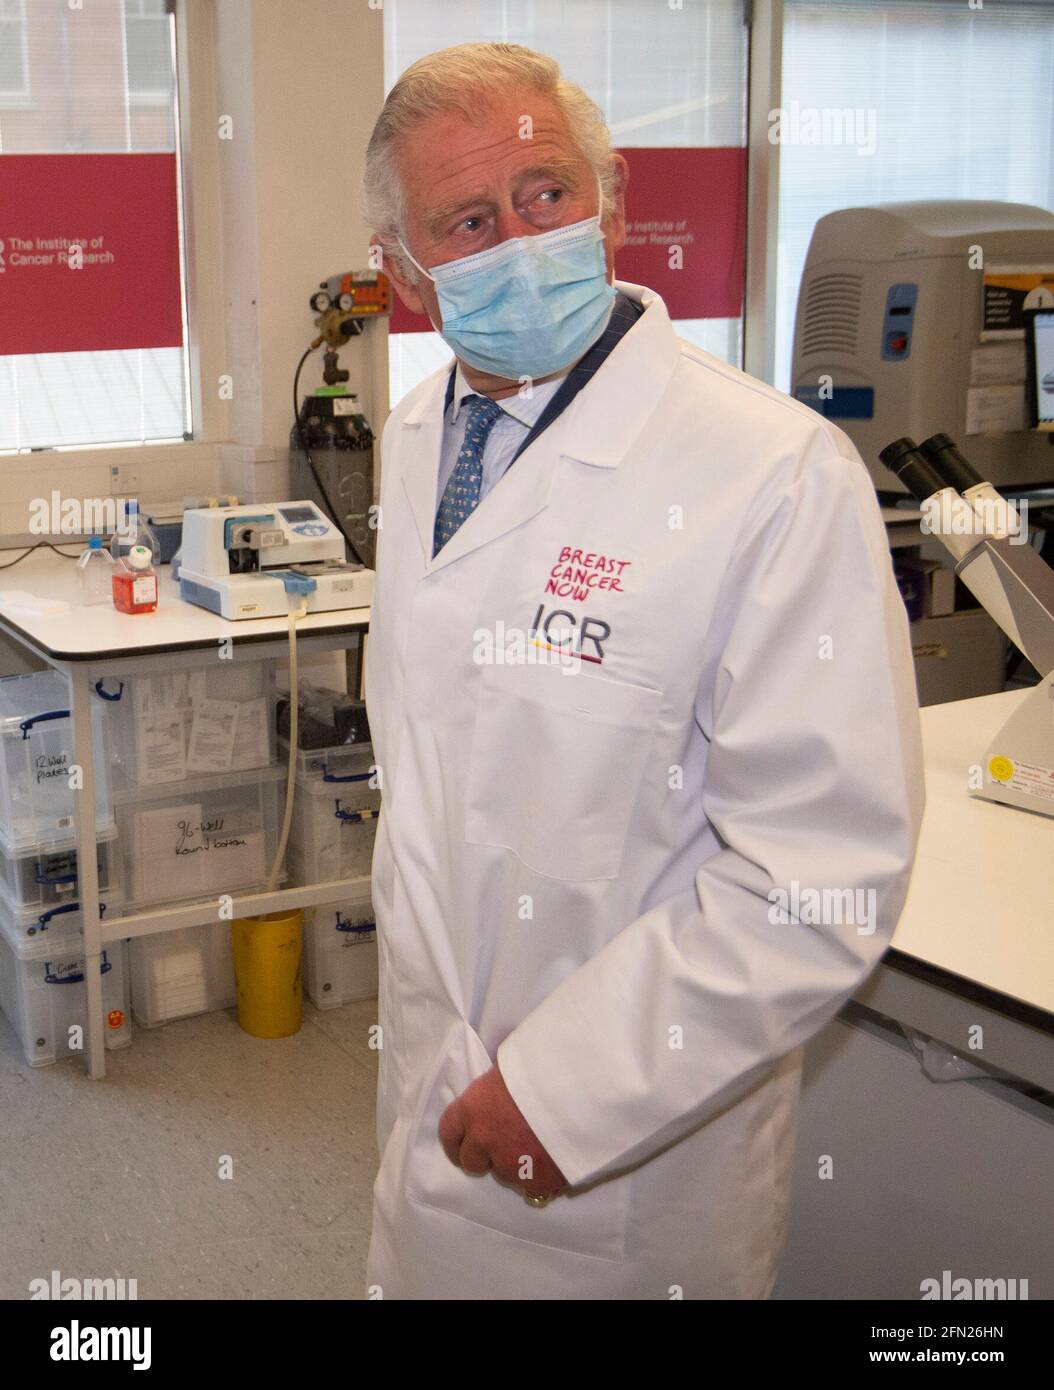 The Prince of Wales during a visit to the the Breast Cancer Now Toby Robins Research Centre in London, 21 years after he formally opened the research centre. During the visit Charles heard about the charity's achievements and how Covid-19 has impacted their funded research. Picture date: Thursday May 13, 2021. Stock Photo